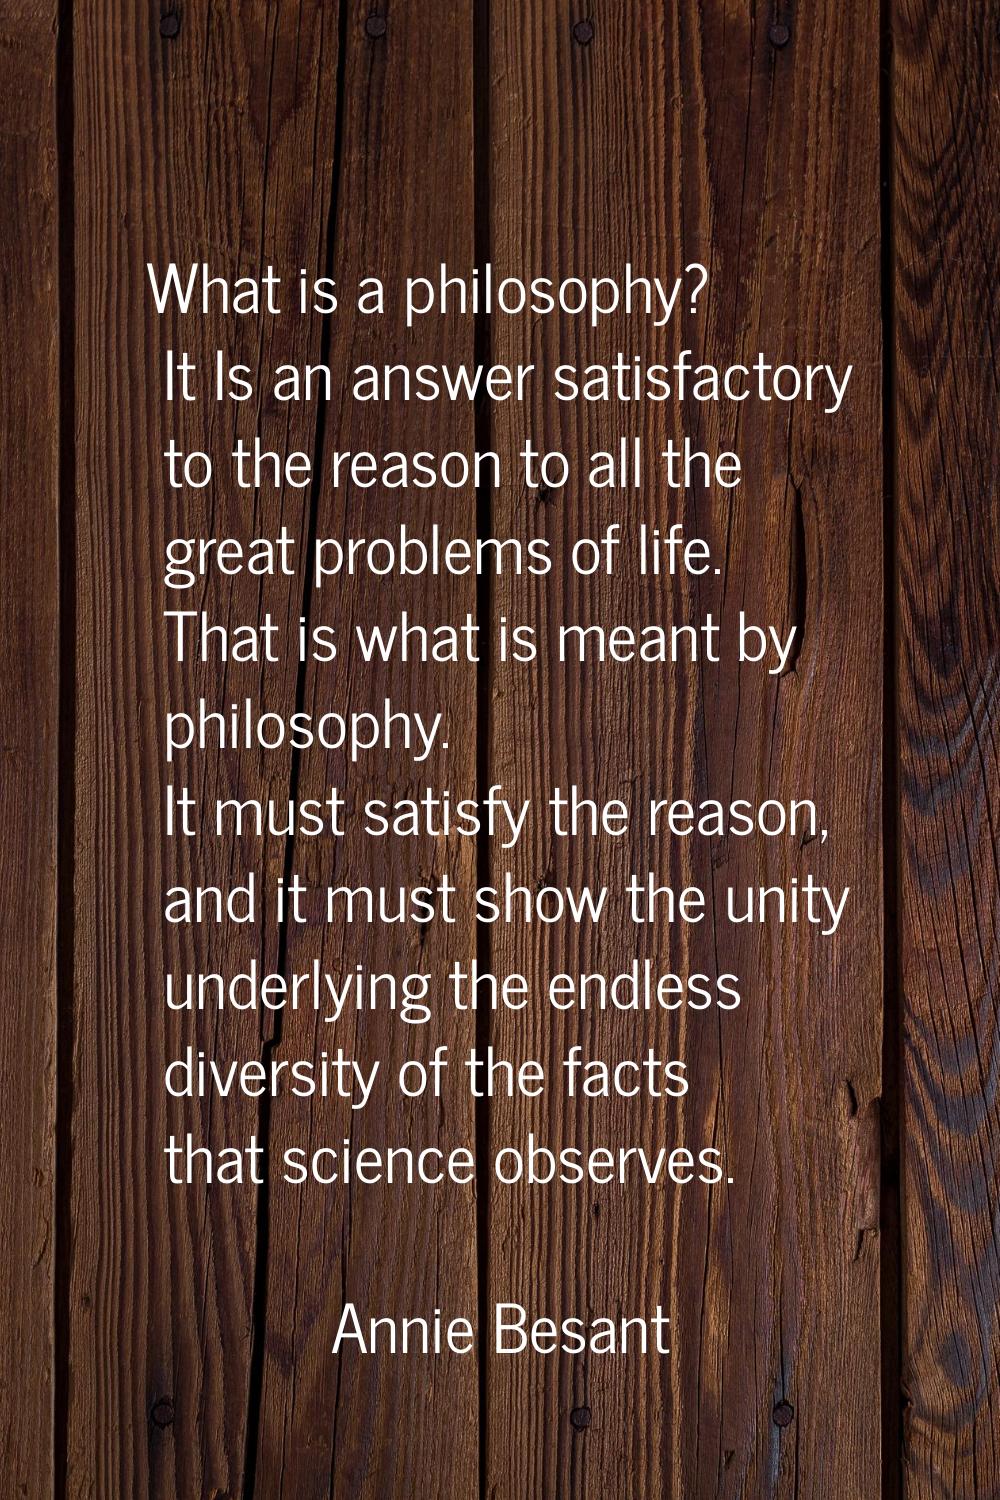 What is a philosophy? It Is an answer satisfactory to the reason to all the great problems of life.